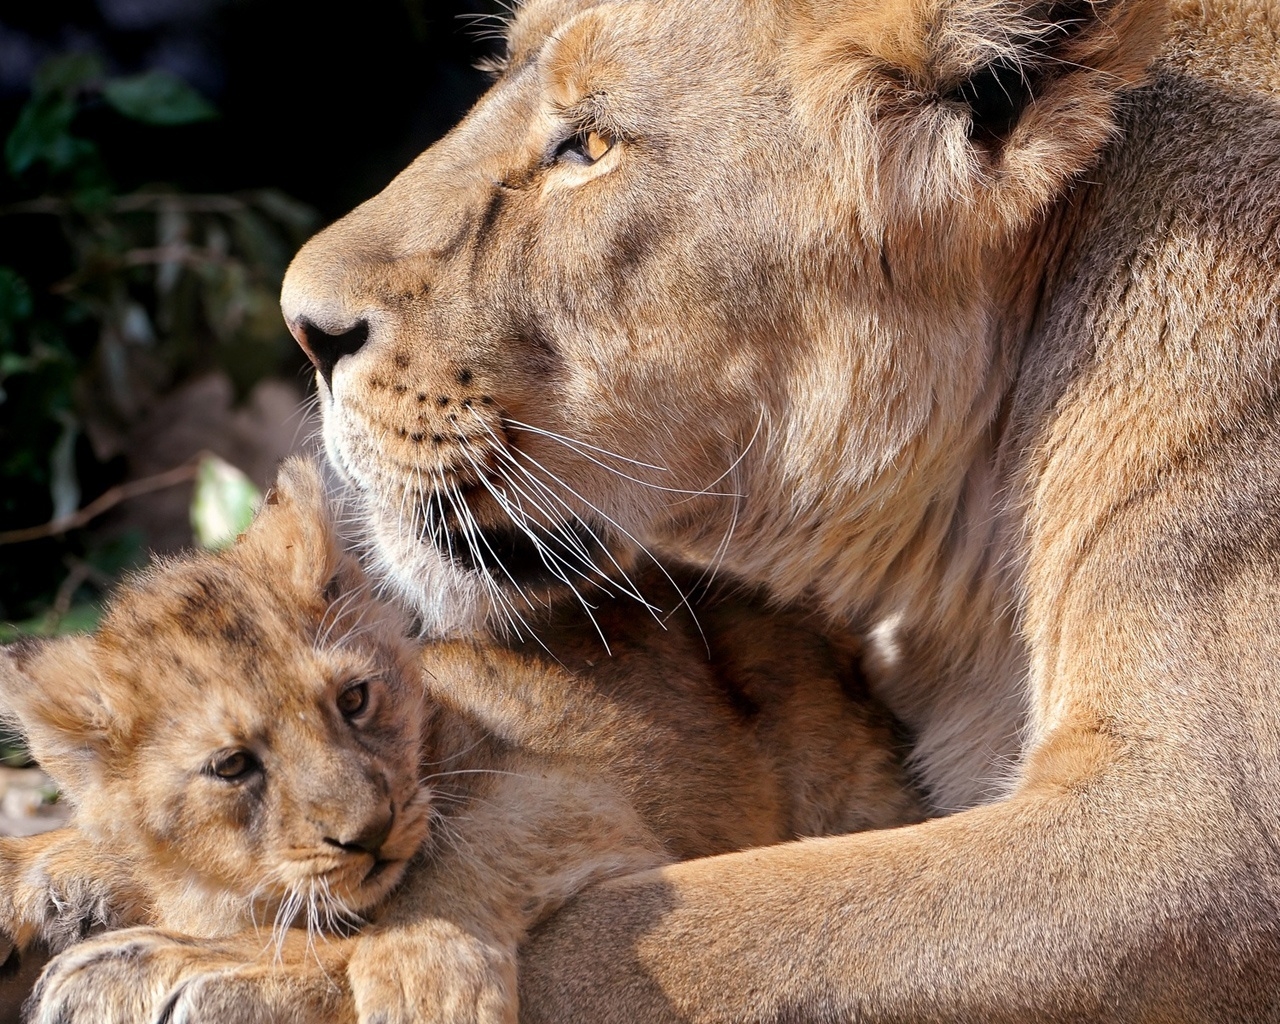 Lioness and her cub for 1280 x 1024 resolution